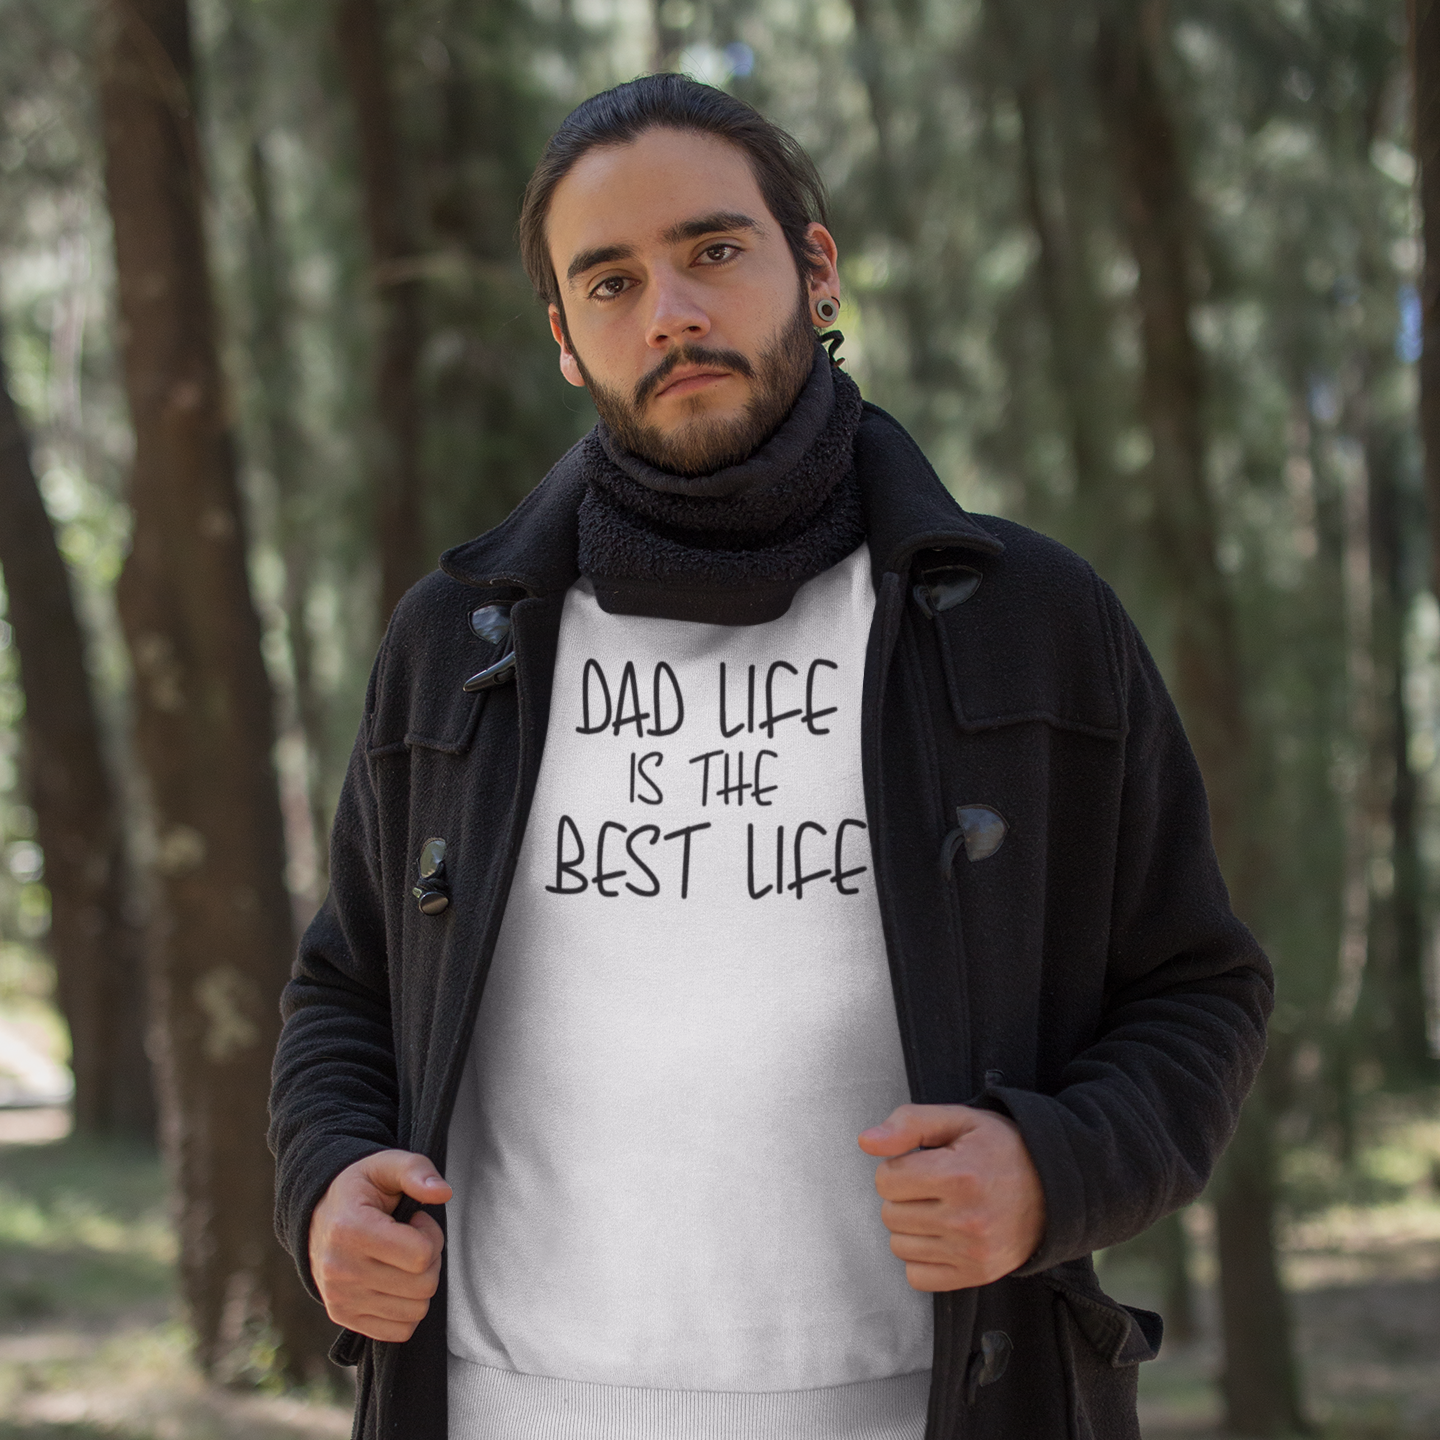 'Dad life is the best life' sweater